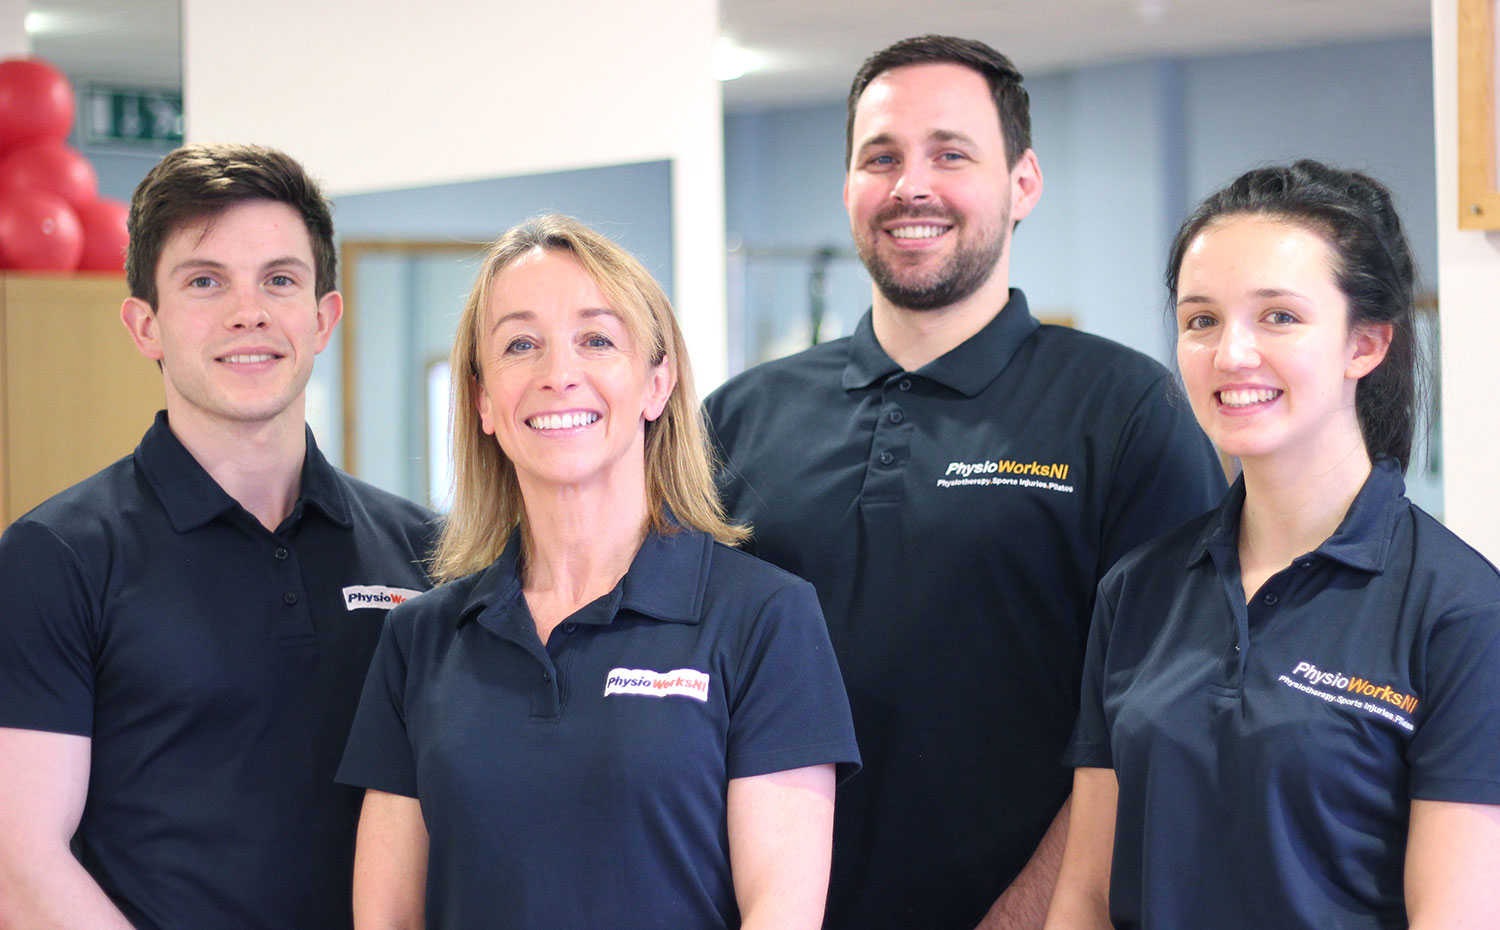 Out team of Physiotherapists at PhysioWorks Belfast